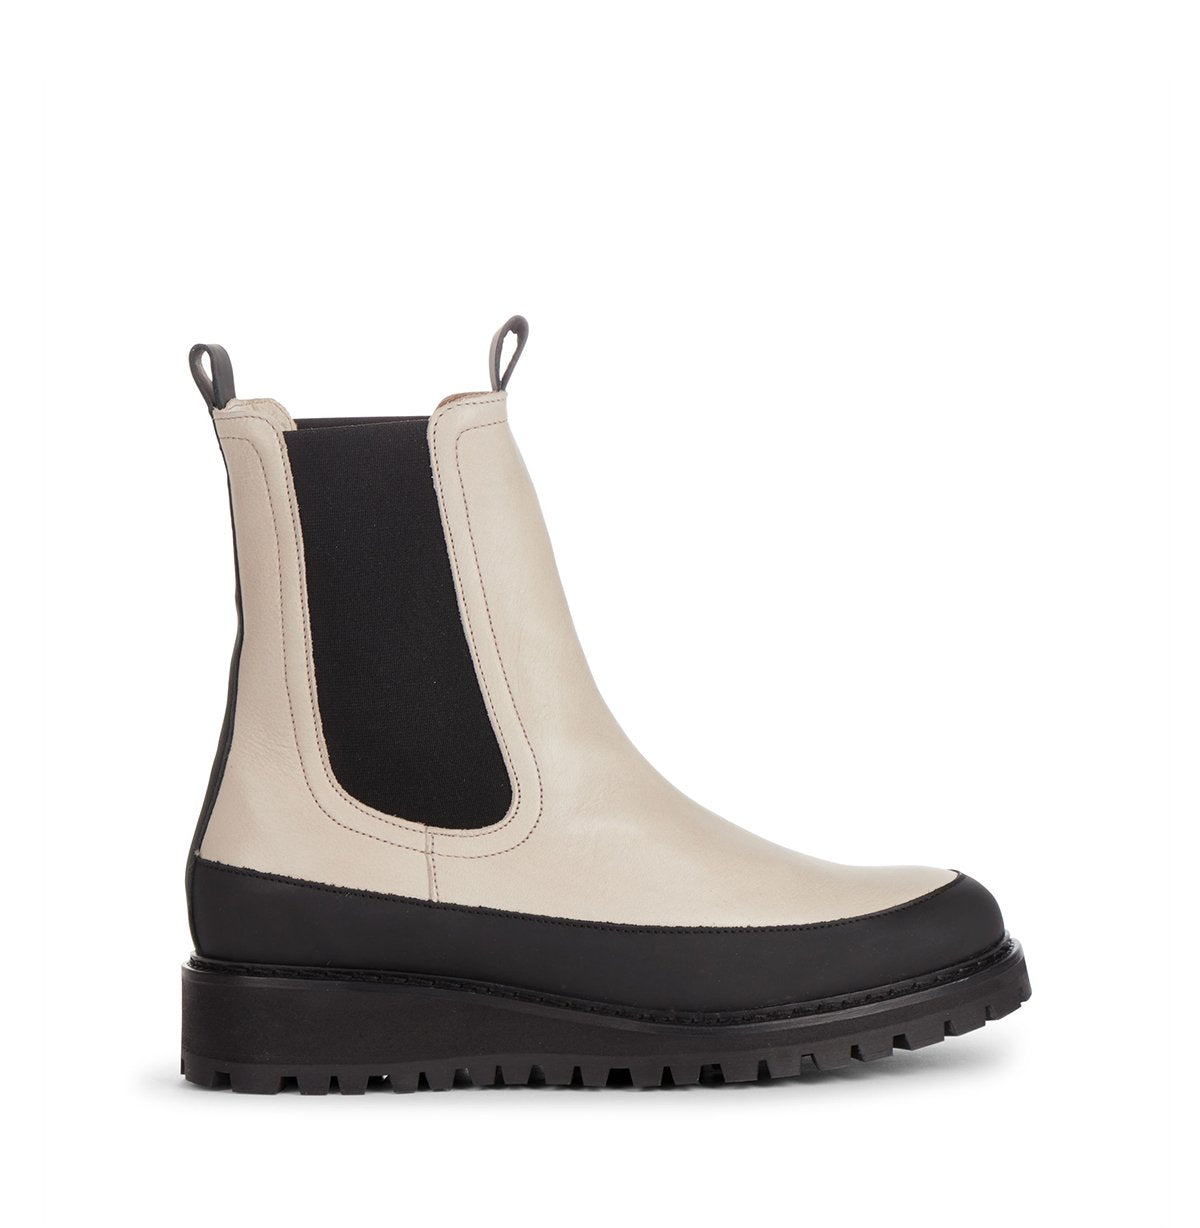 Lowa Off White Chelsea Boots 03-016-011-Off White - 01